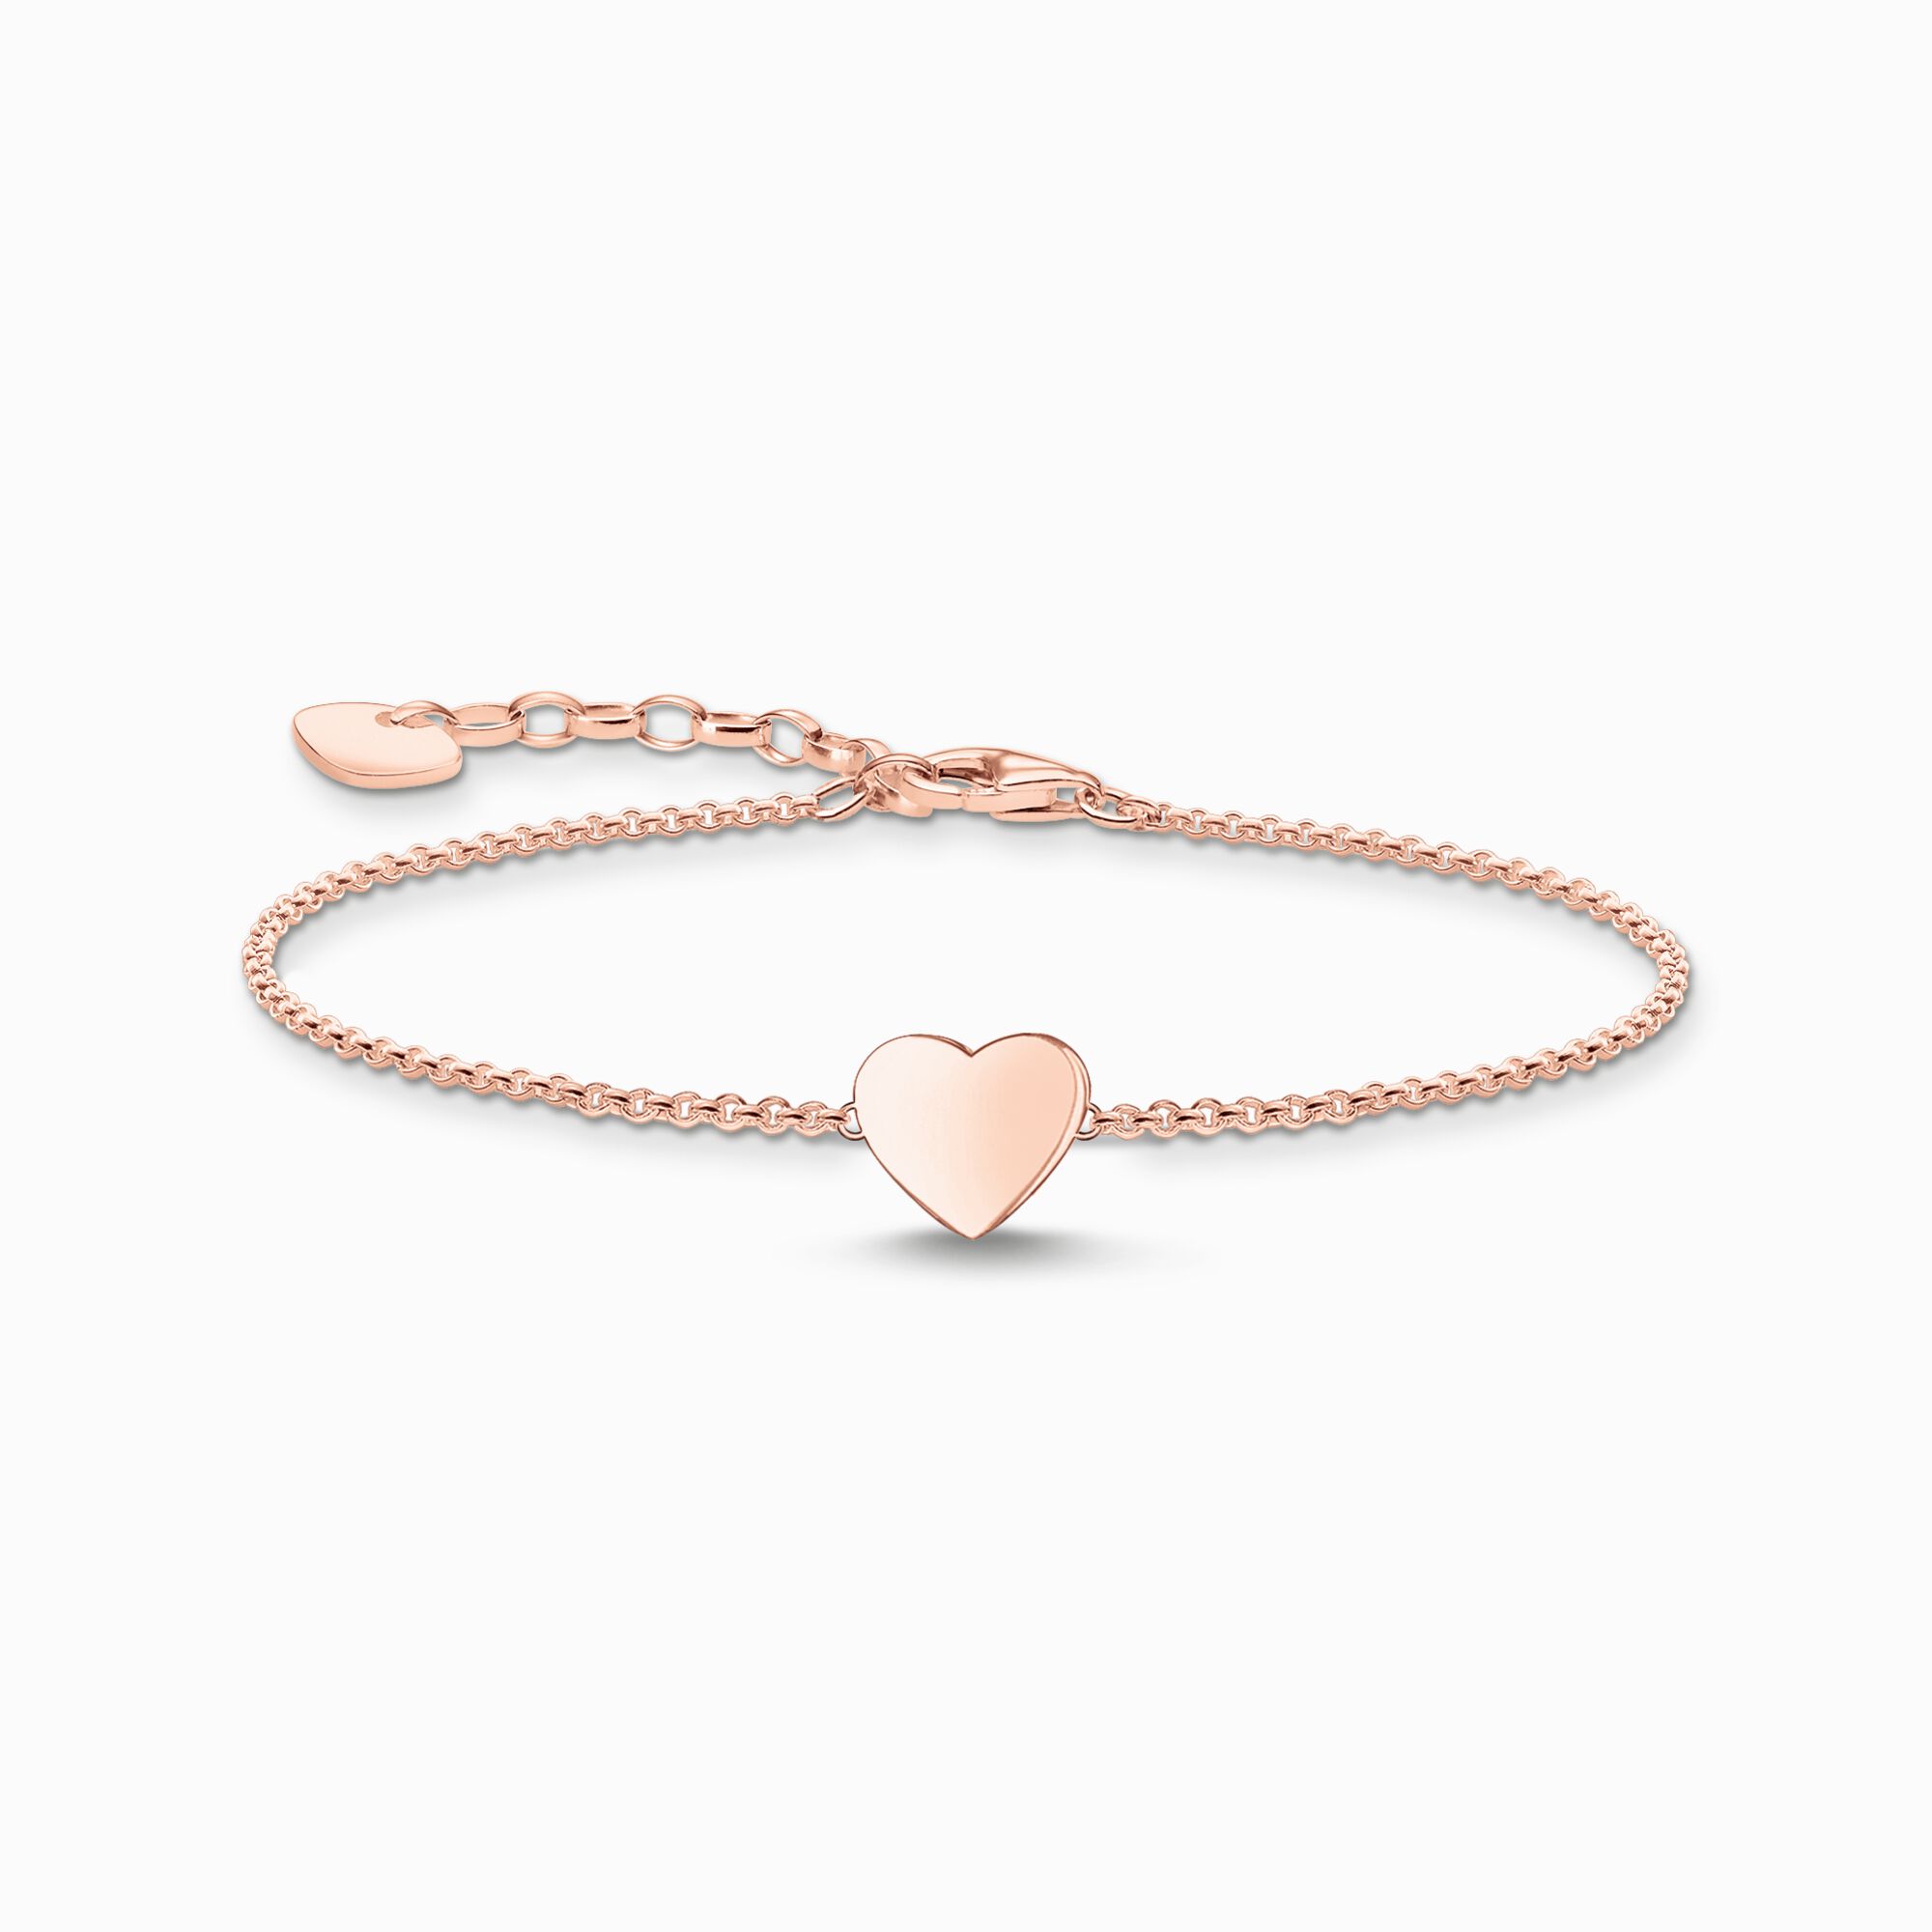 Bracelet heart rose gold from the  collection in the THOMAS SABO online store